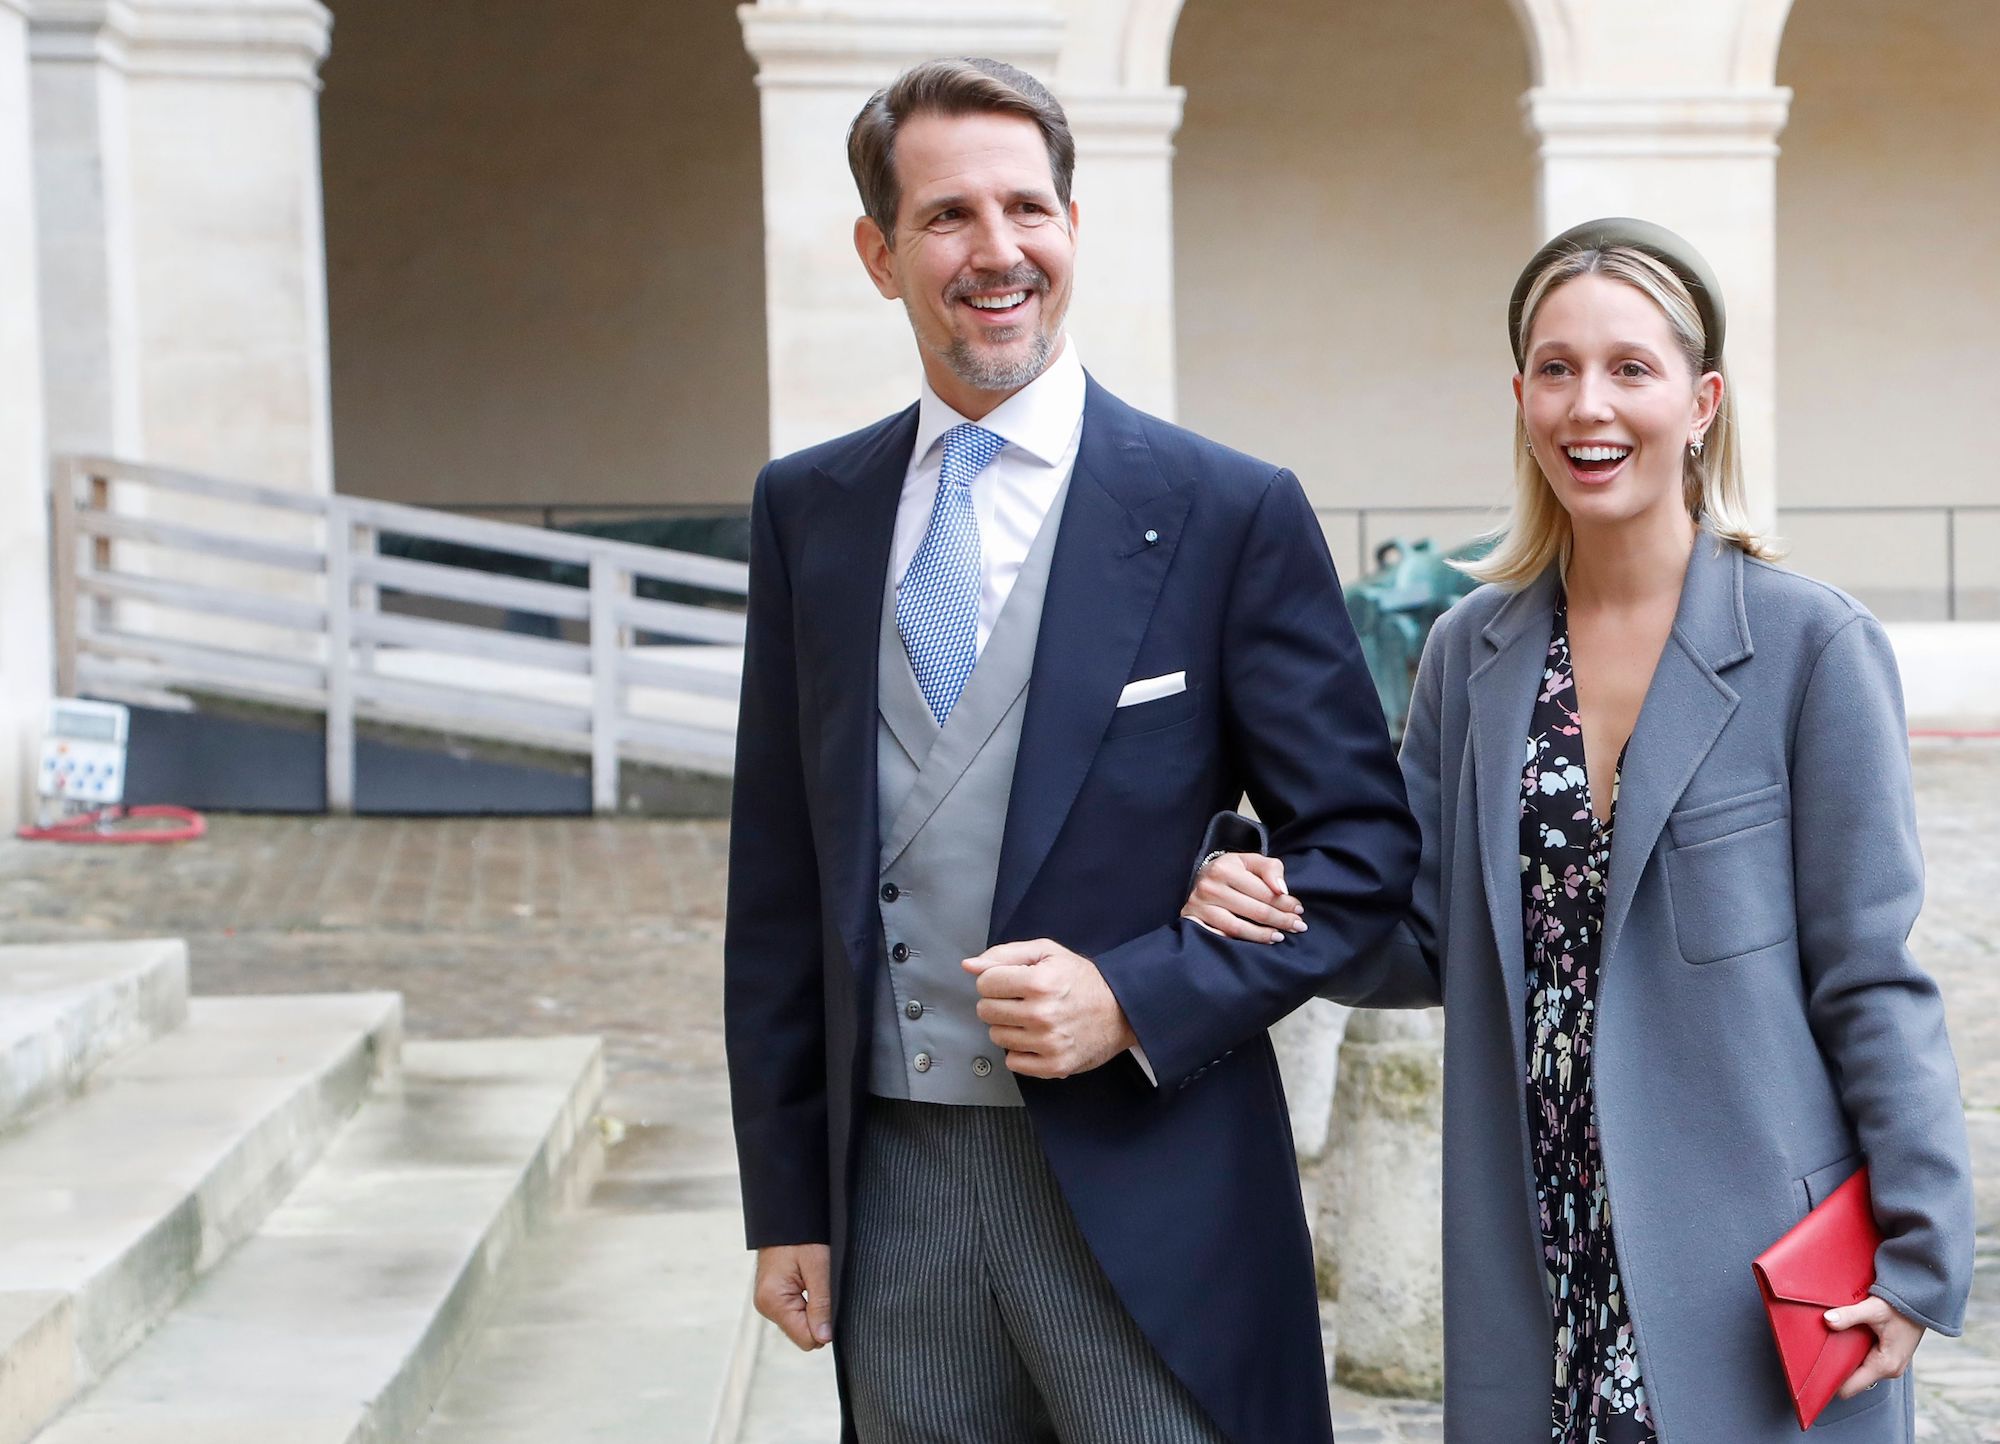 Princess Marie-Chantal Miller Got $200 Million Dowry When Marrying Crown Prince of Greece